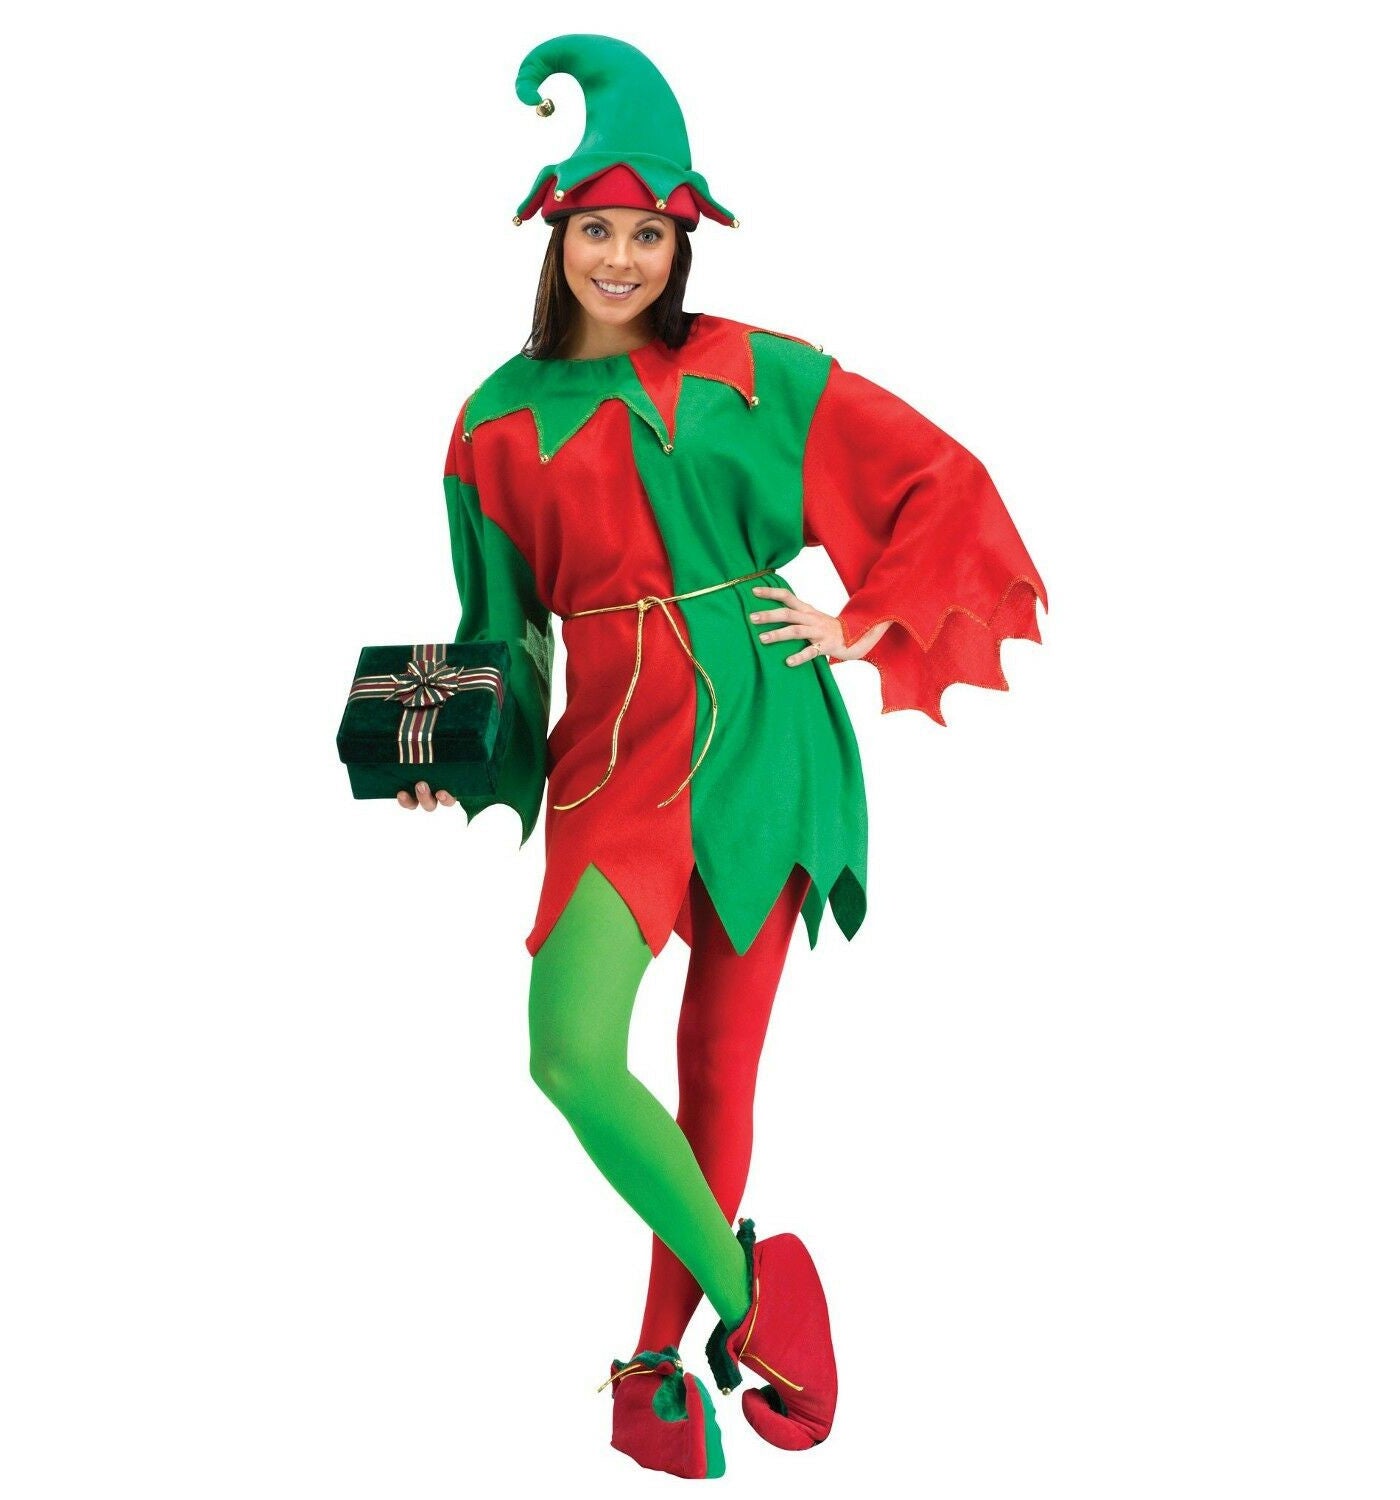 Elf Santa Helper Unisex Christmas Adult Costume Two-tone tunic with metallic edging and collar with jingle bell accents Metallic cord belt Two-tone elf shoes with jingle bell accents Elf hat